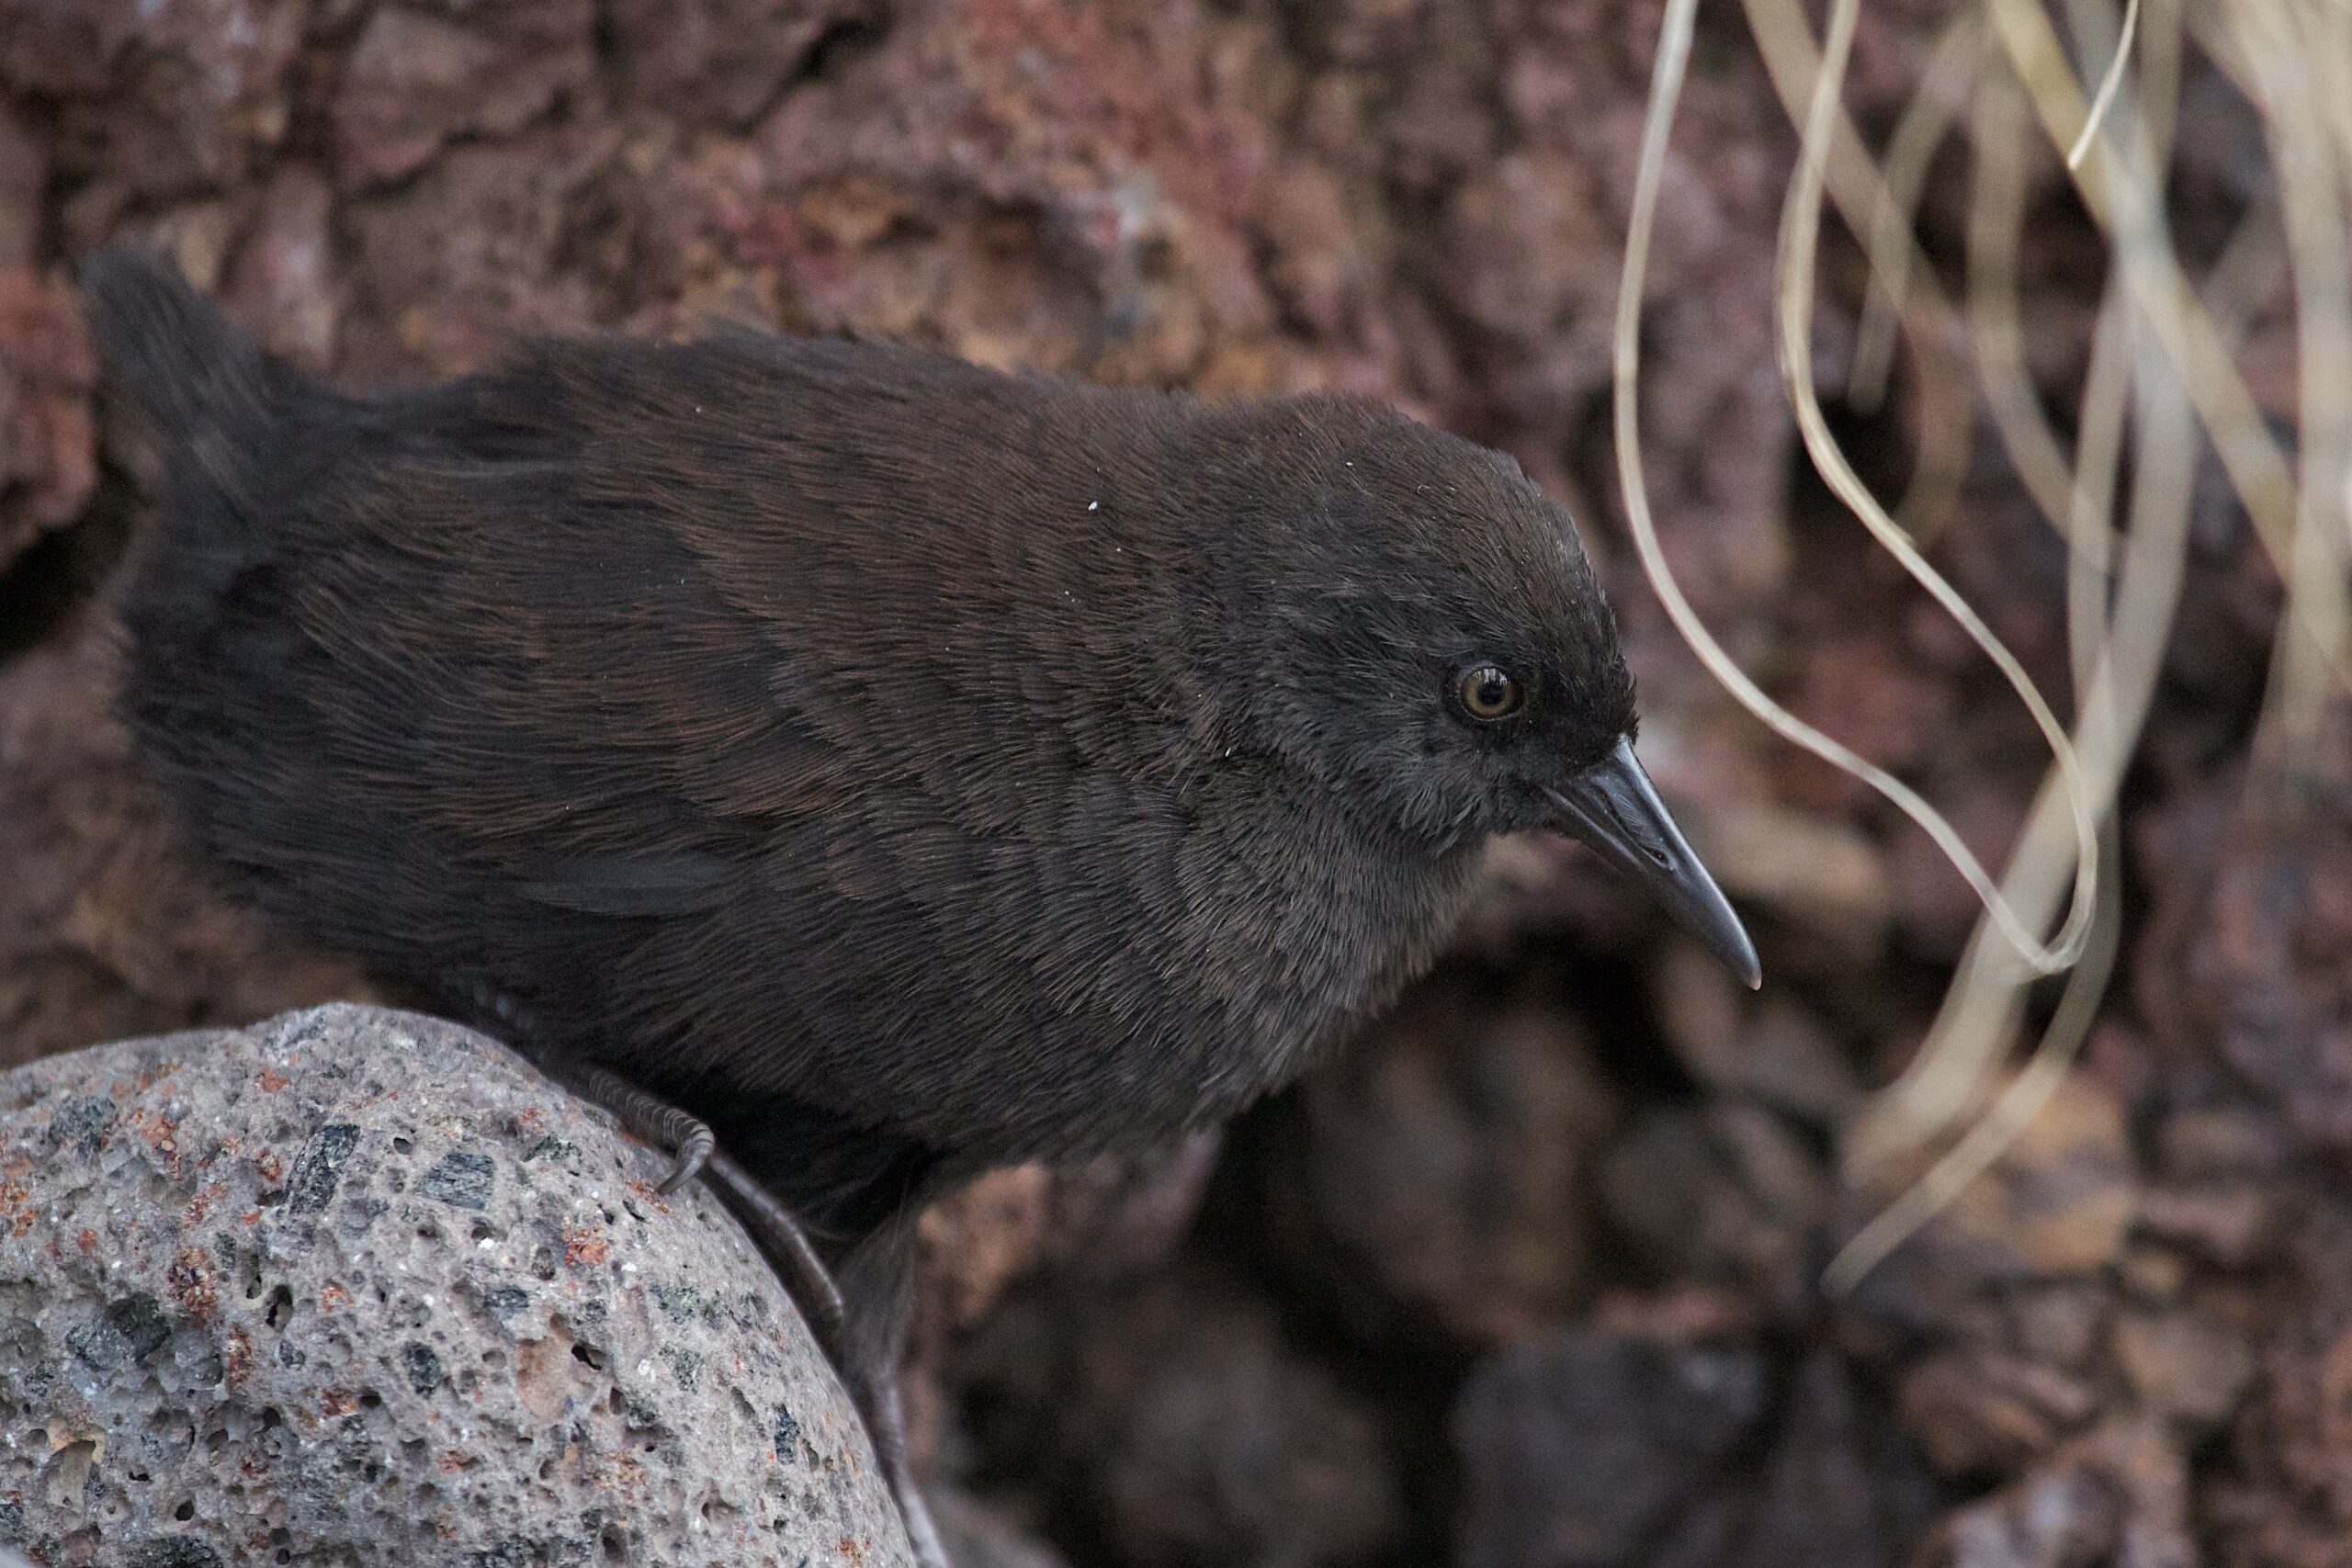 A chubby black-brown bird with a sharp bill stands in rocks.